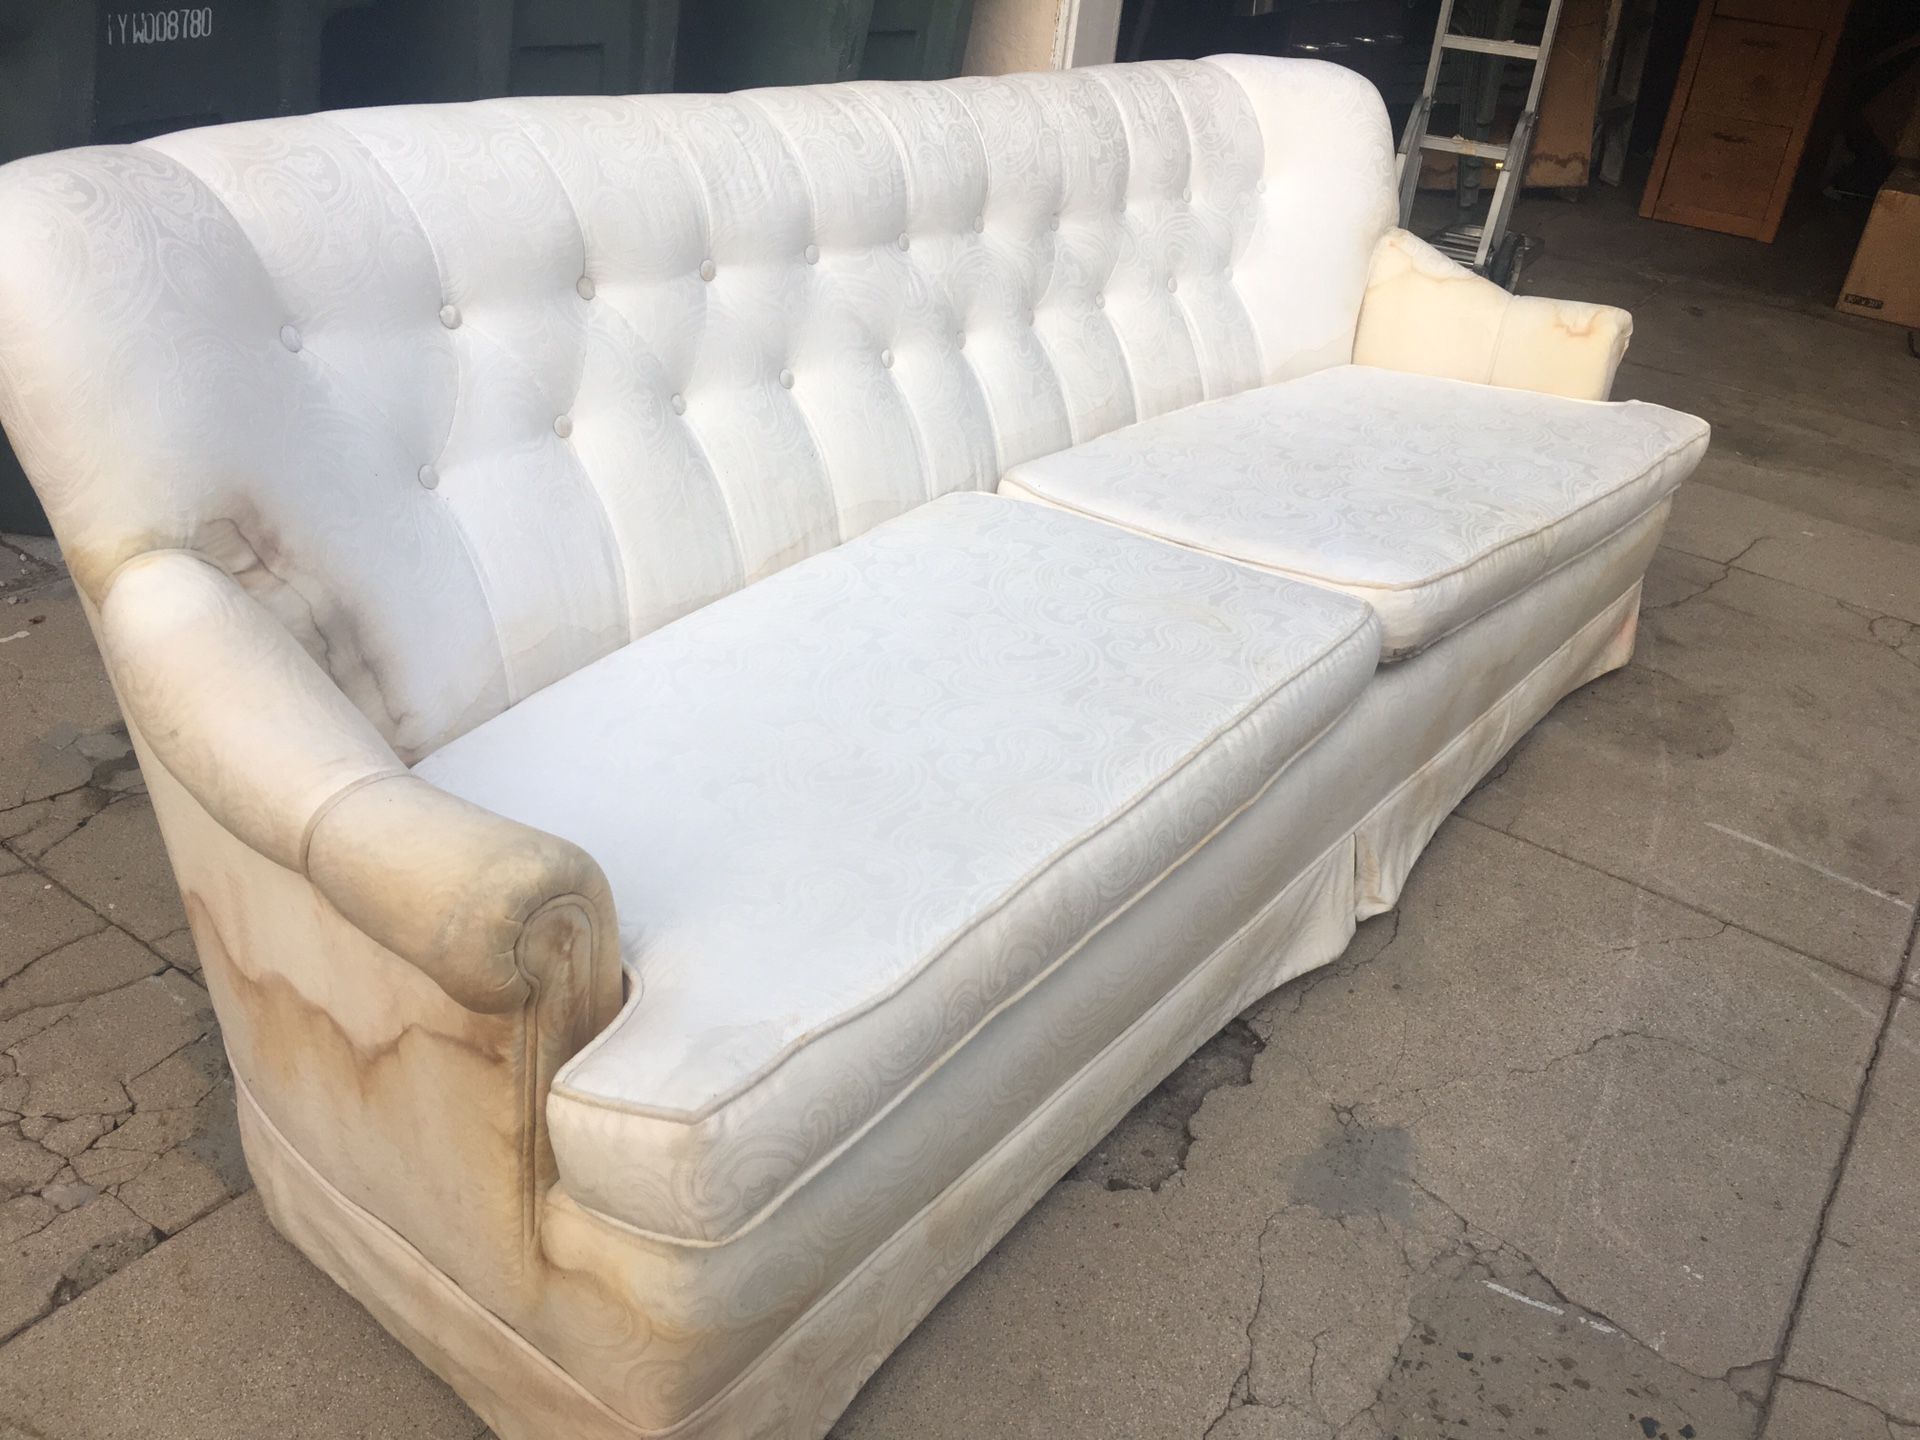 FREE COUCH FREE - GOOD MOVIE OR HALLOWEEN PROP